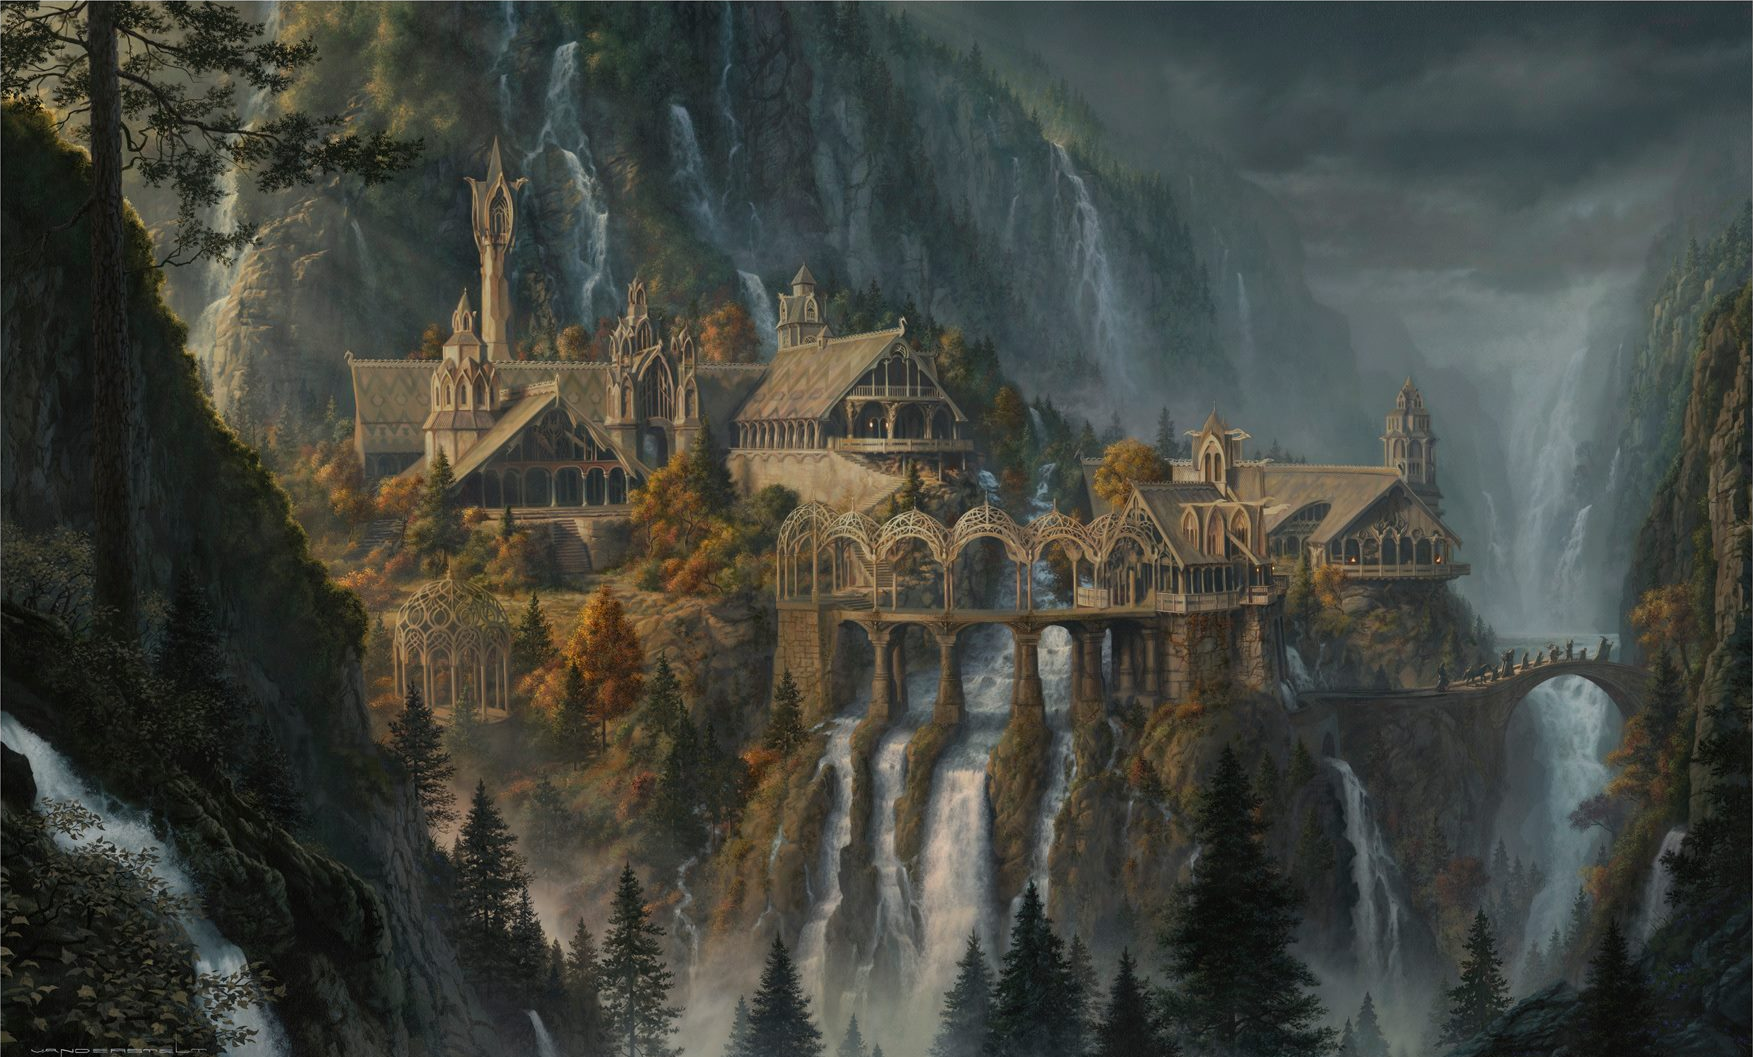 General 1753x1057 The Lord of the Rings waterfall J. R. R. Tolkien Rivendell artwork fantasy art